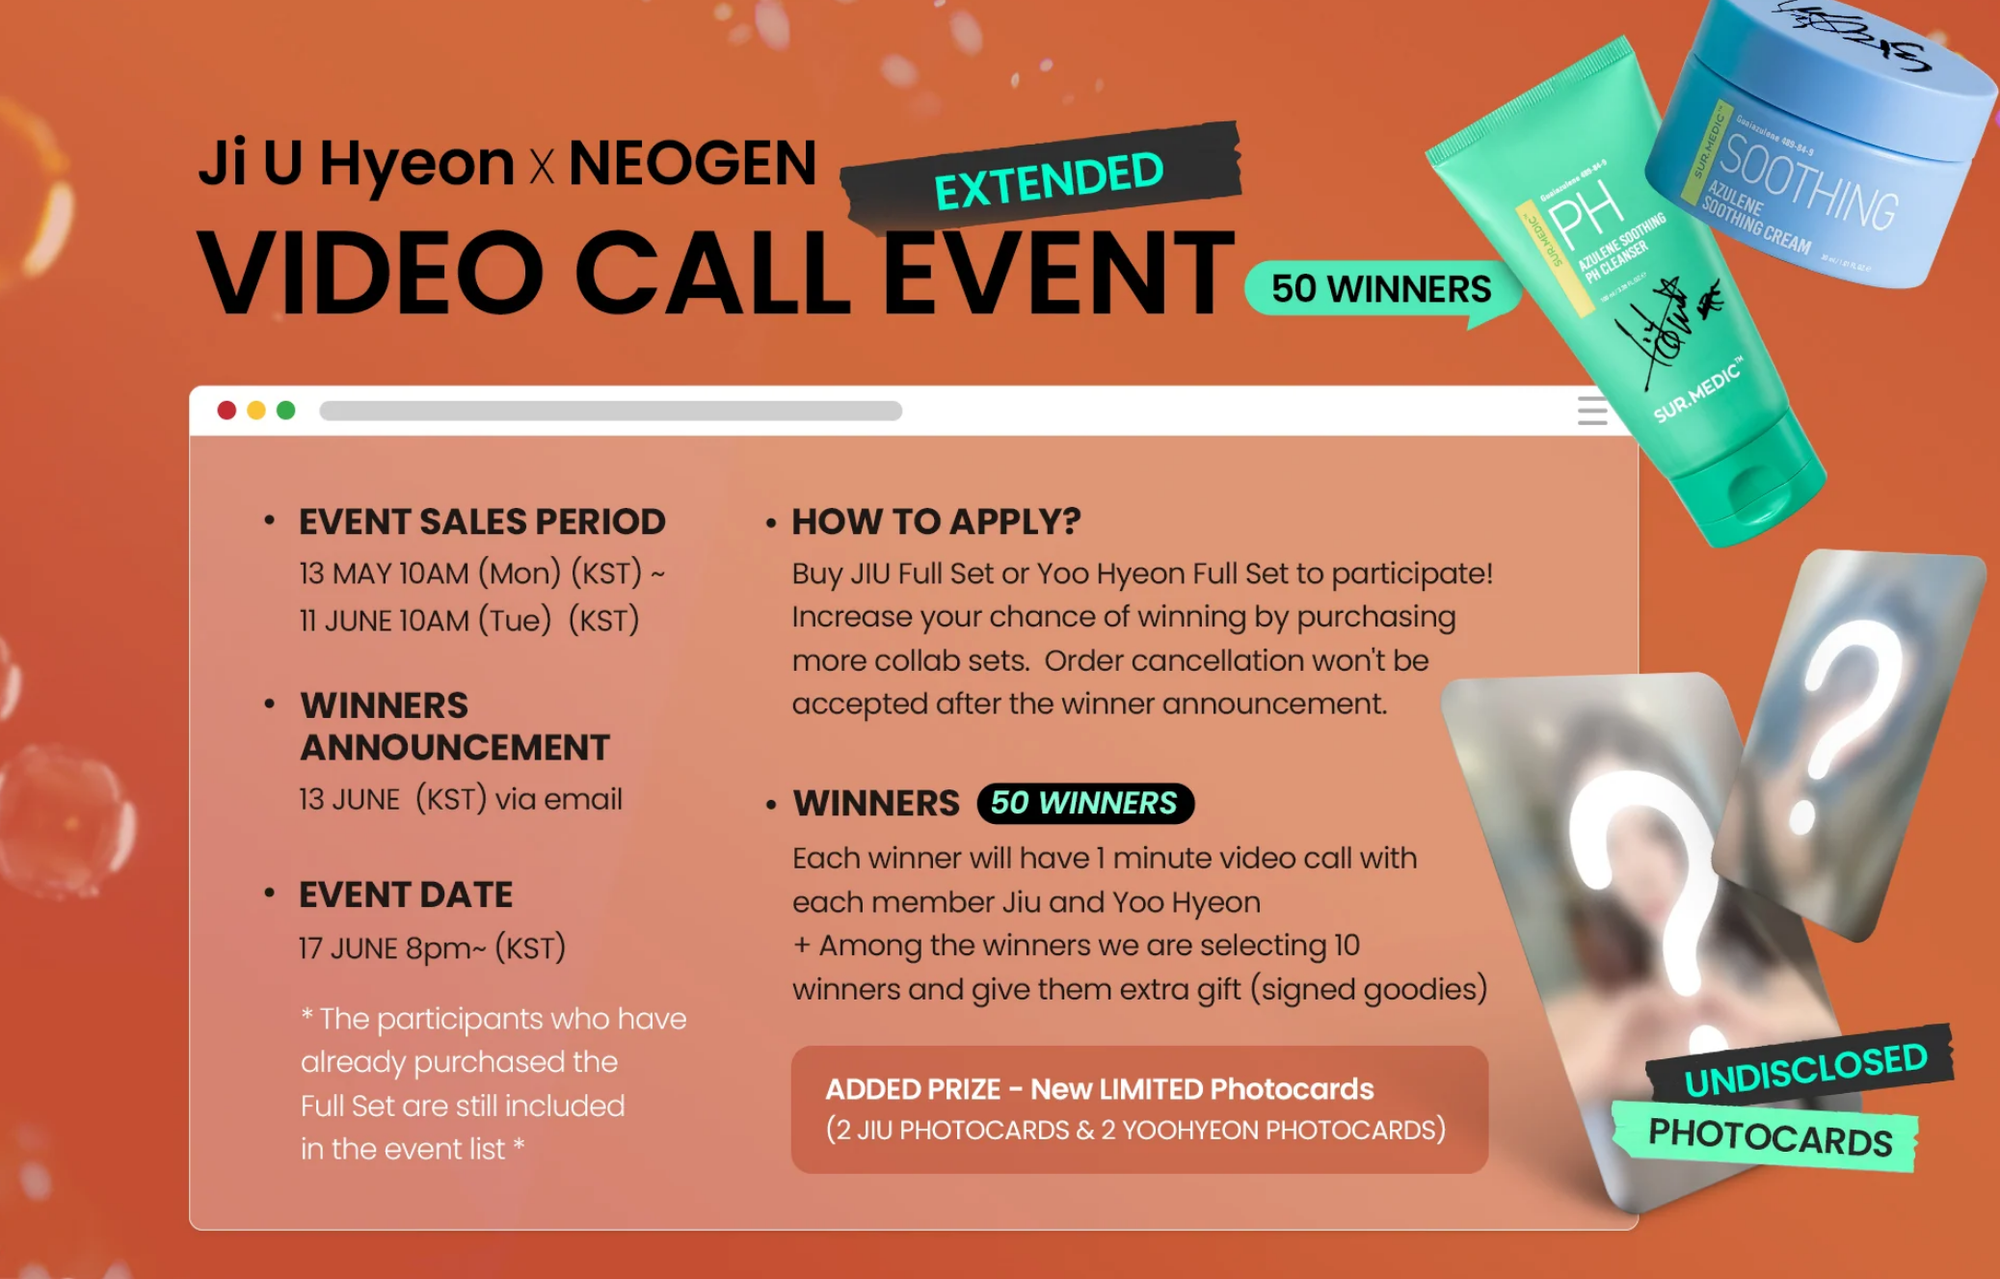 Notice on an orange background extending the JiU and Yoohyeon NEOGEN event with new offers.